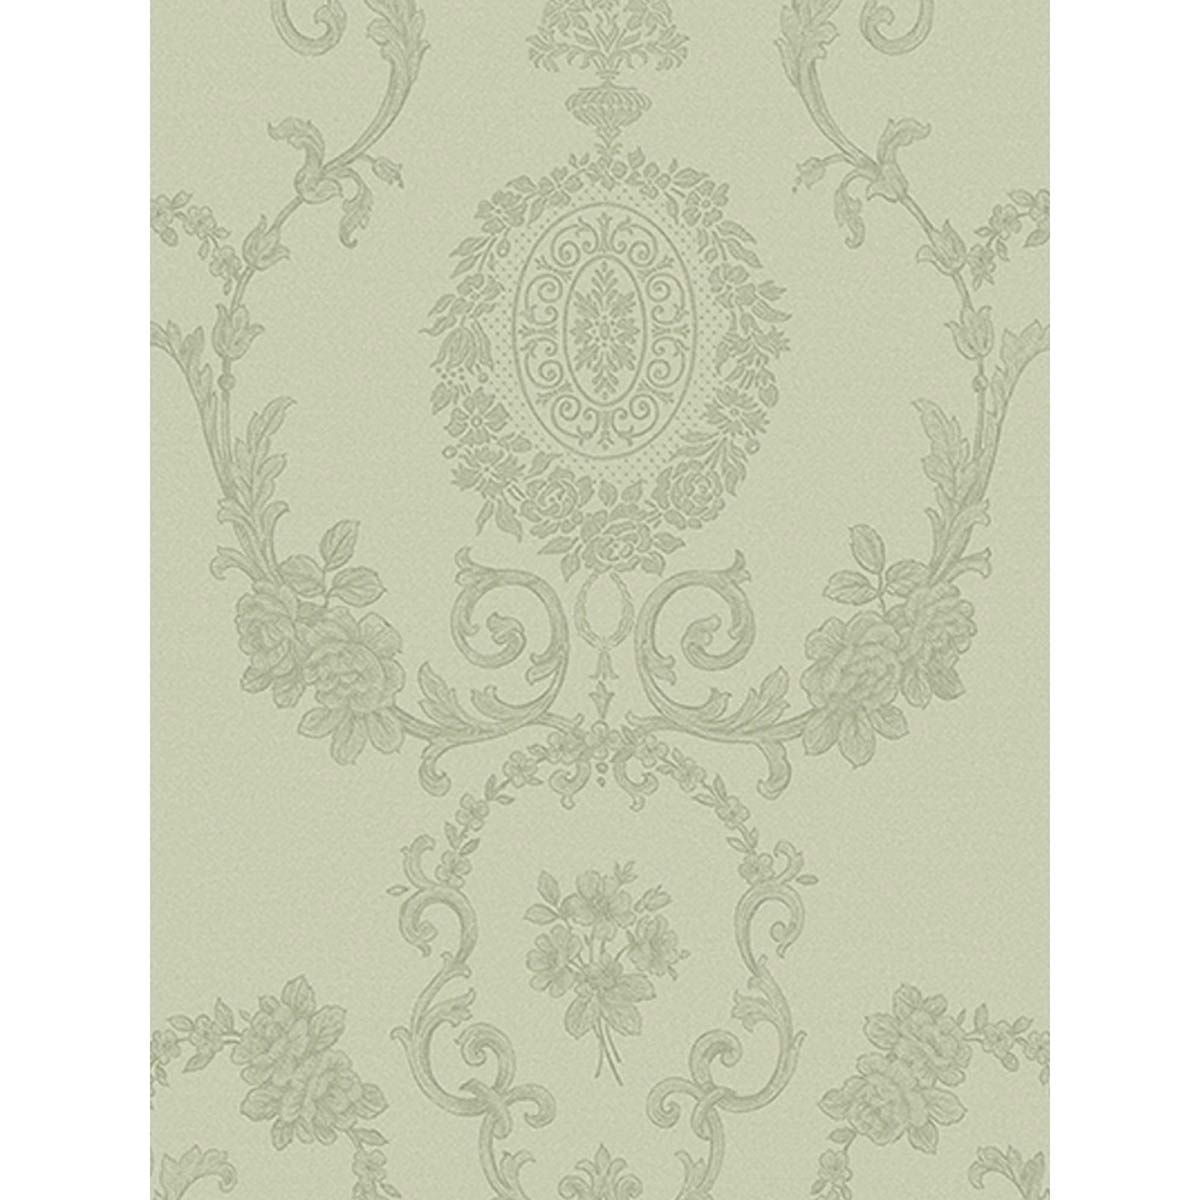 Turquoise and yellow classic pattern classic wallpaper  TenStickers